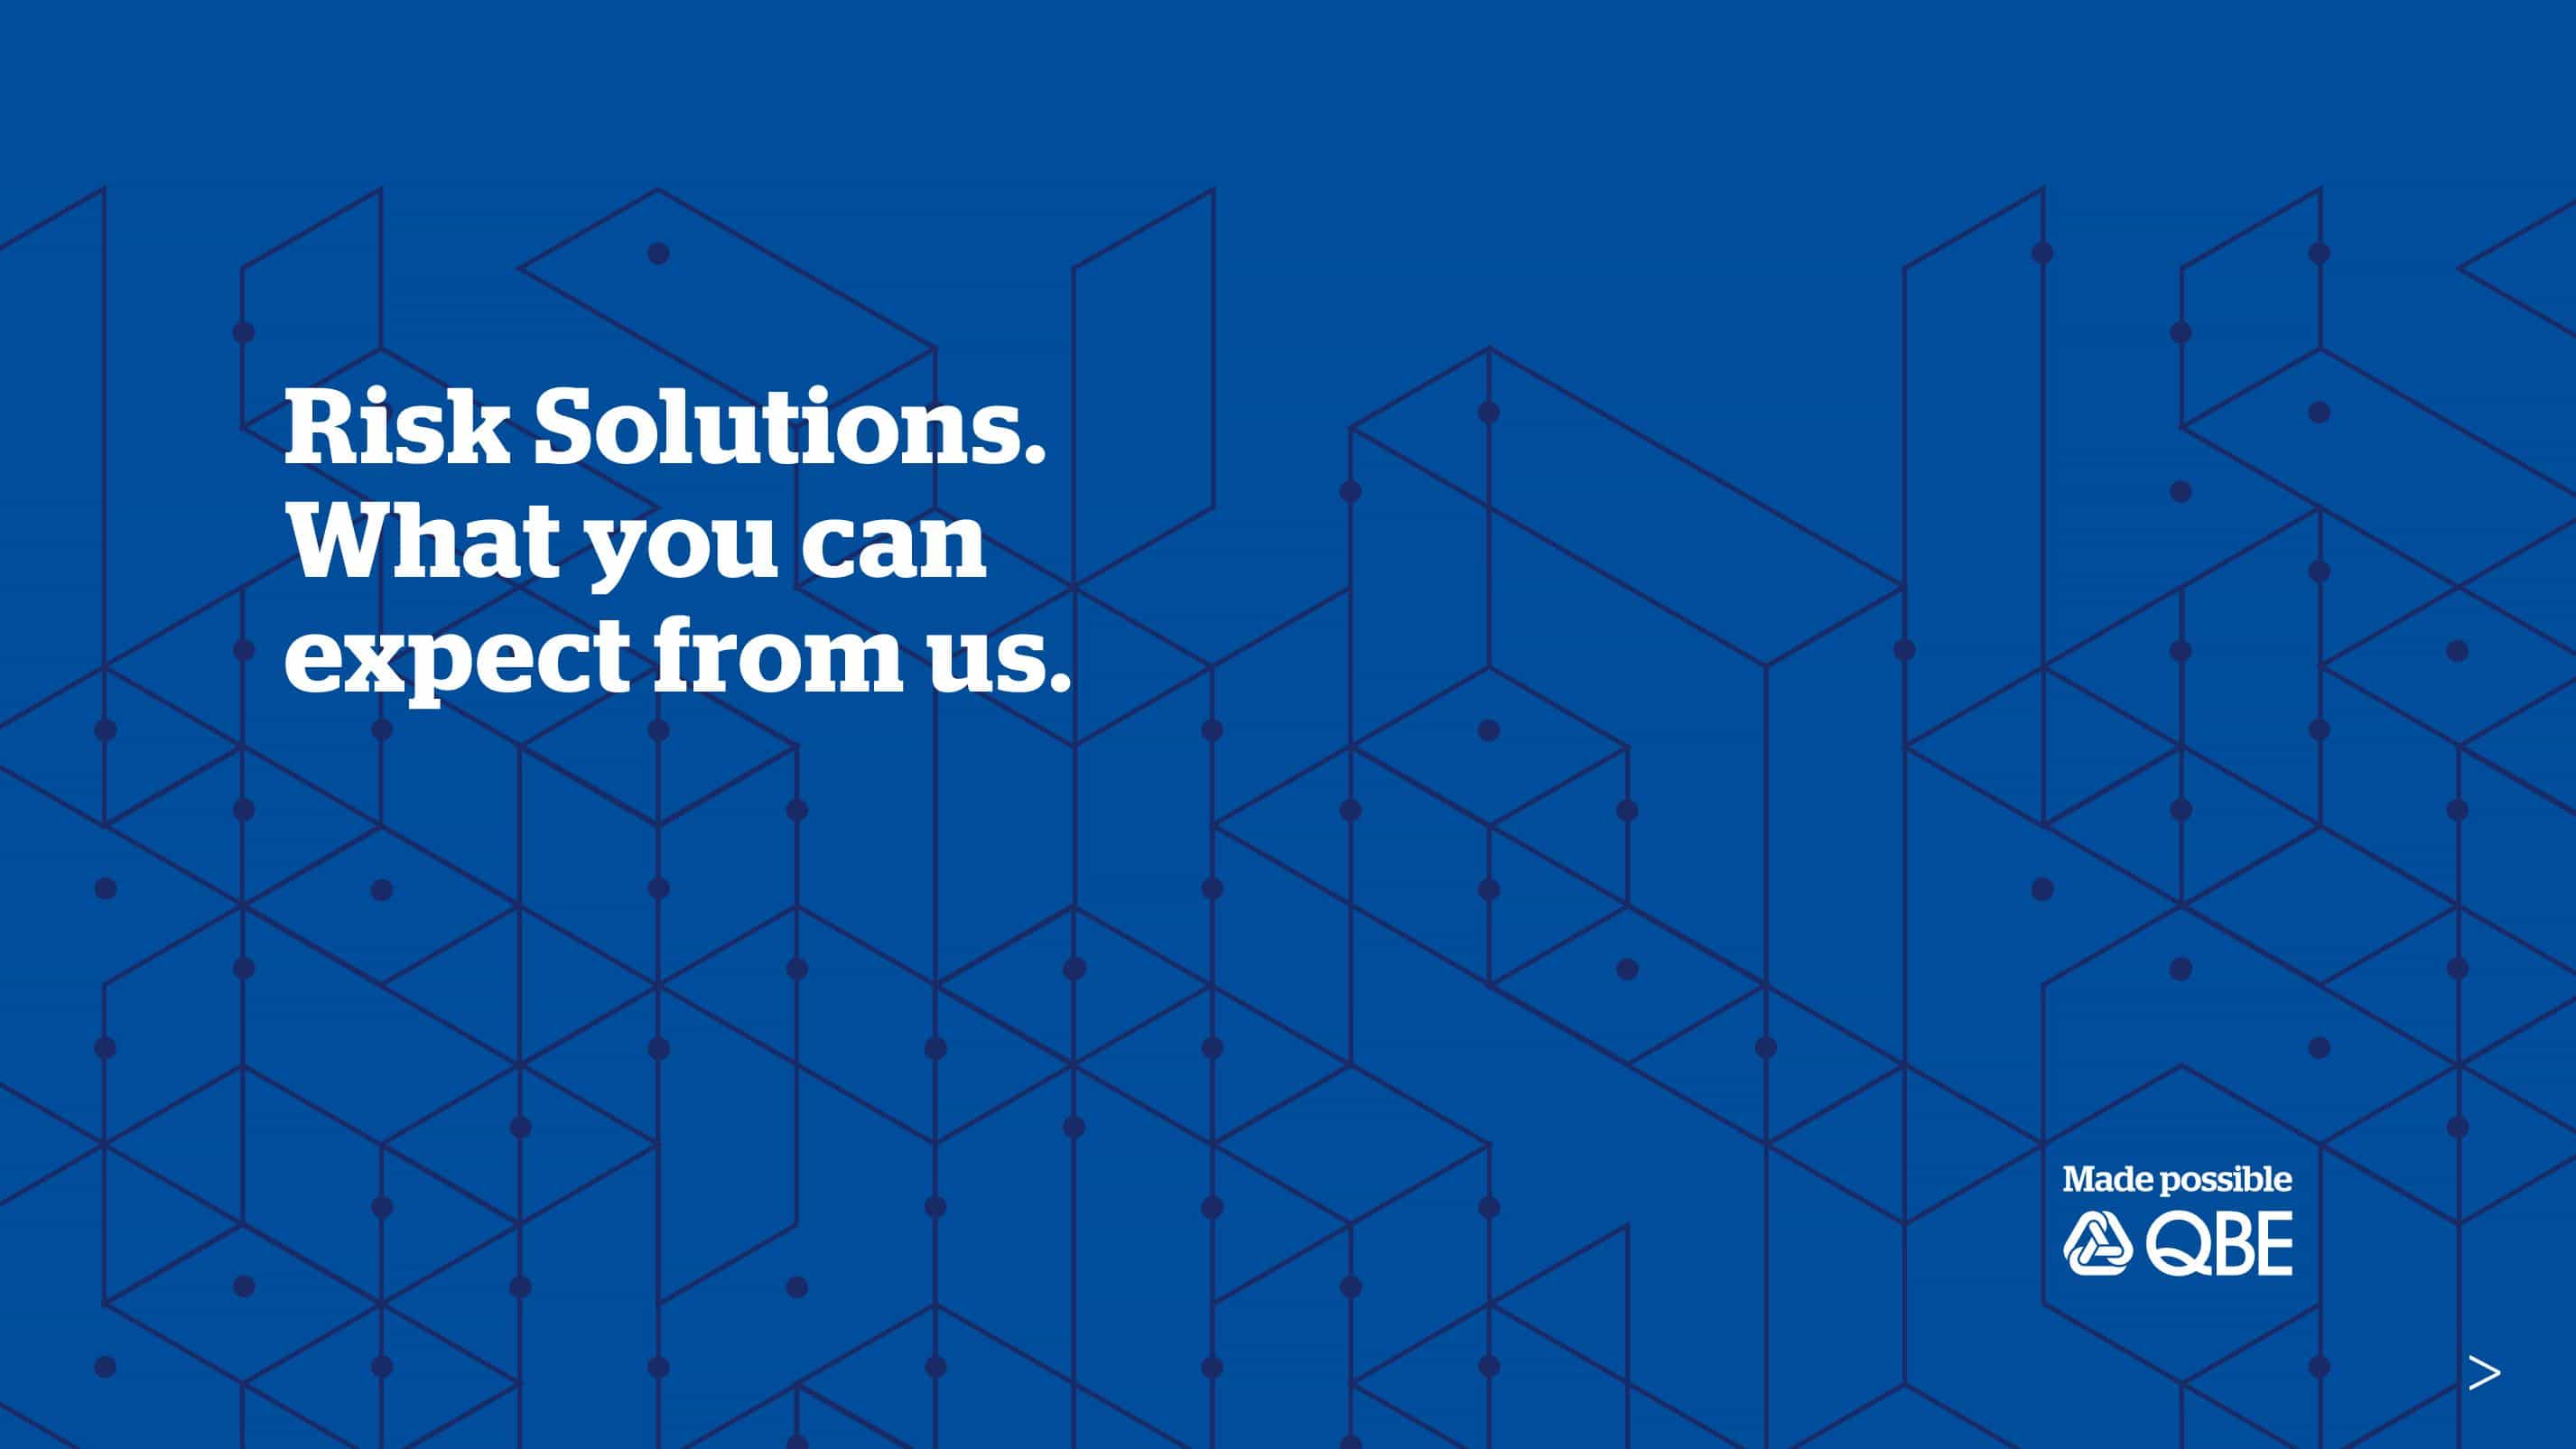 Risk Solutions - what you can expect from us.